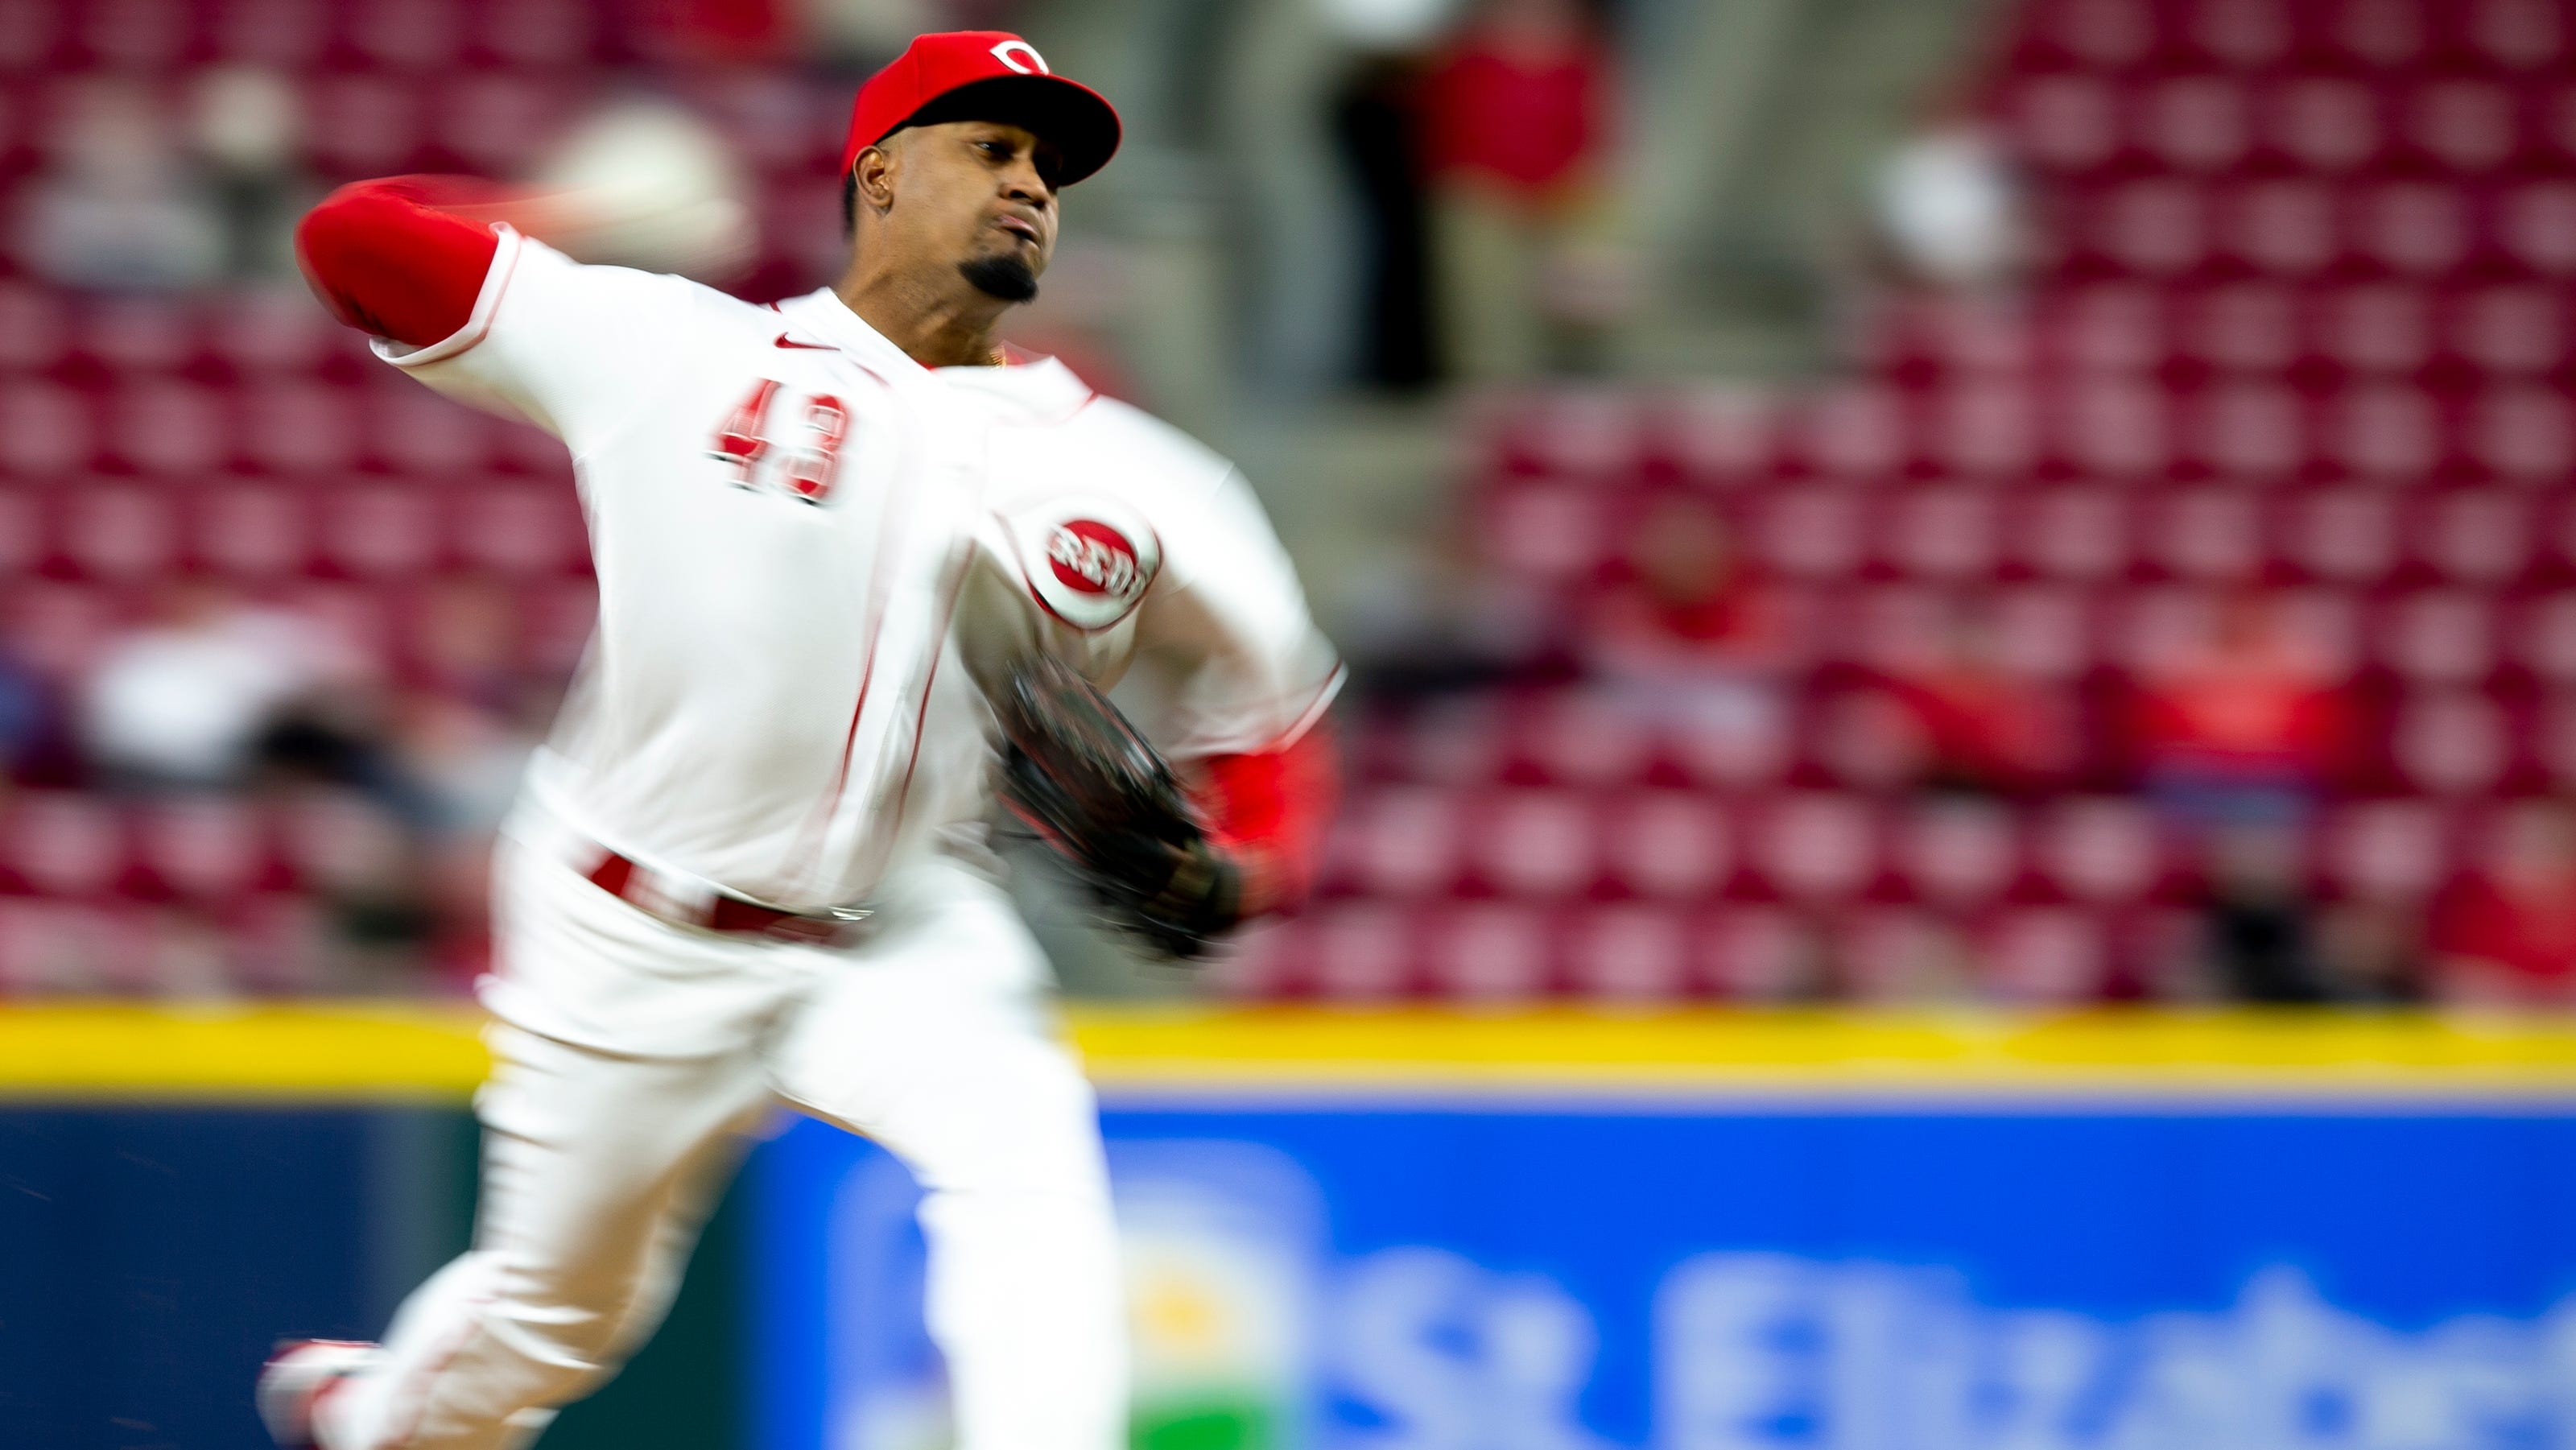 Cincinnati Reds rookie pitcher Alexis Diaz turning heads with unique